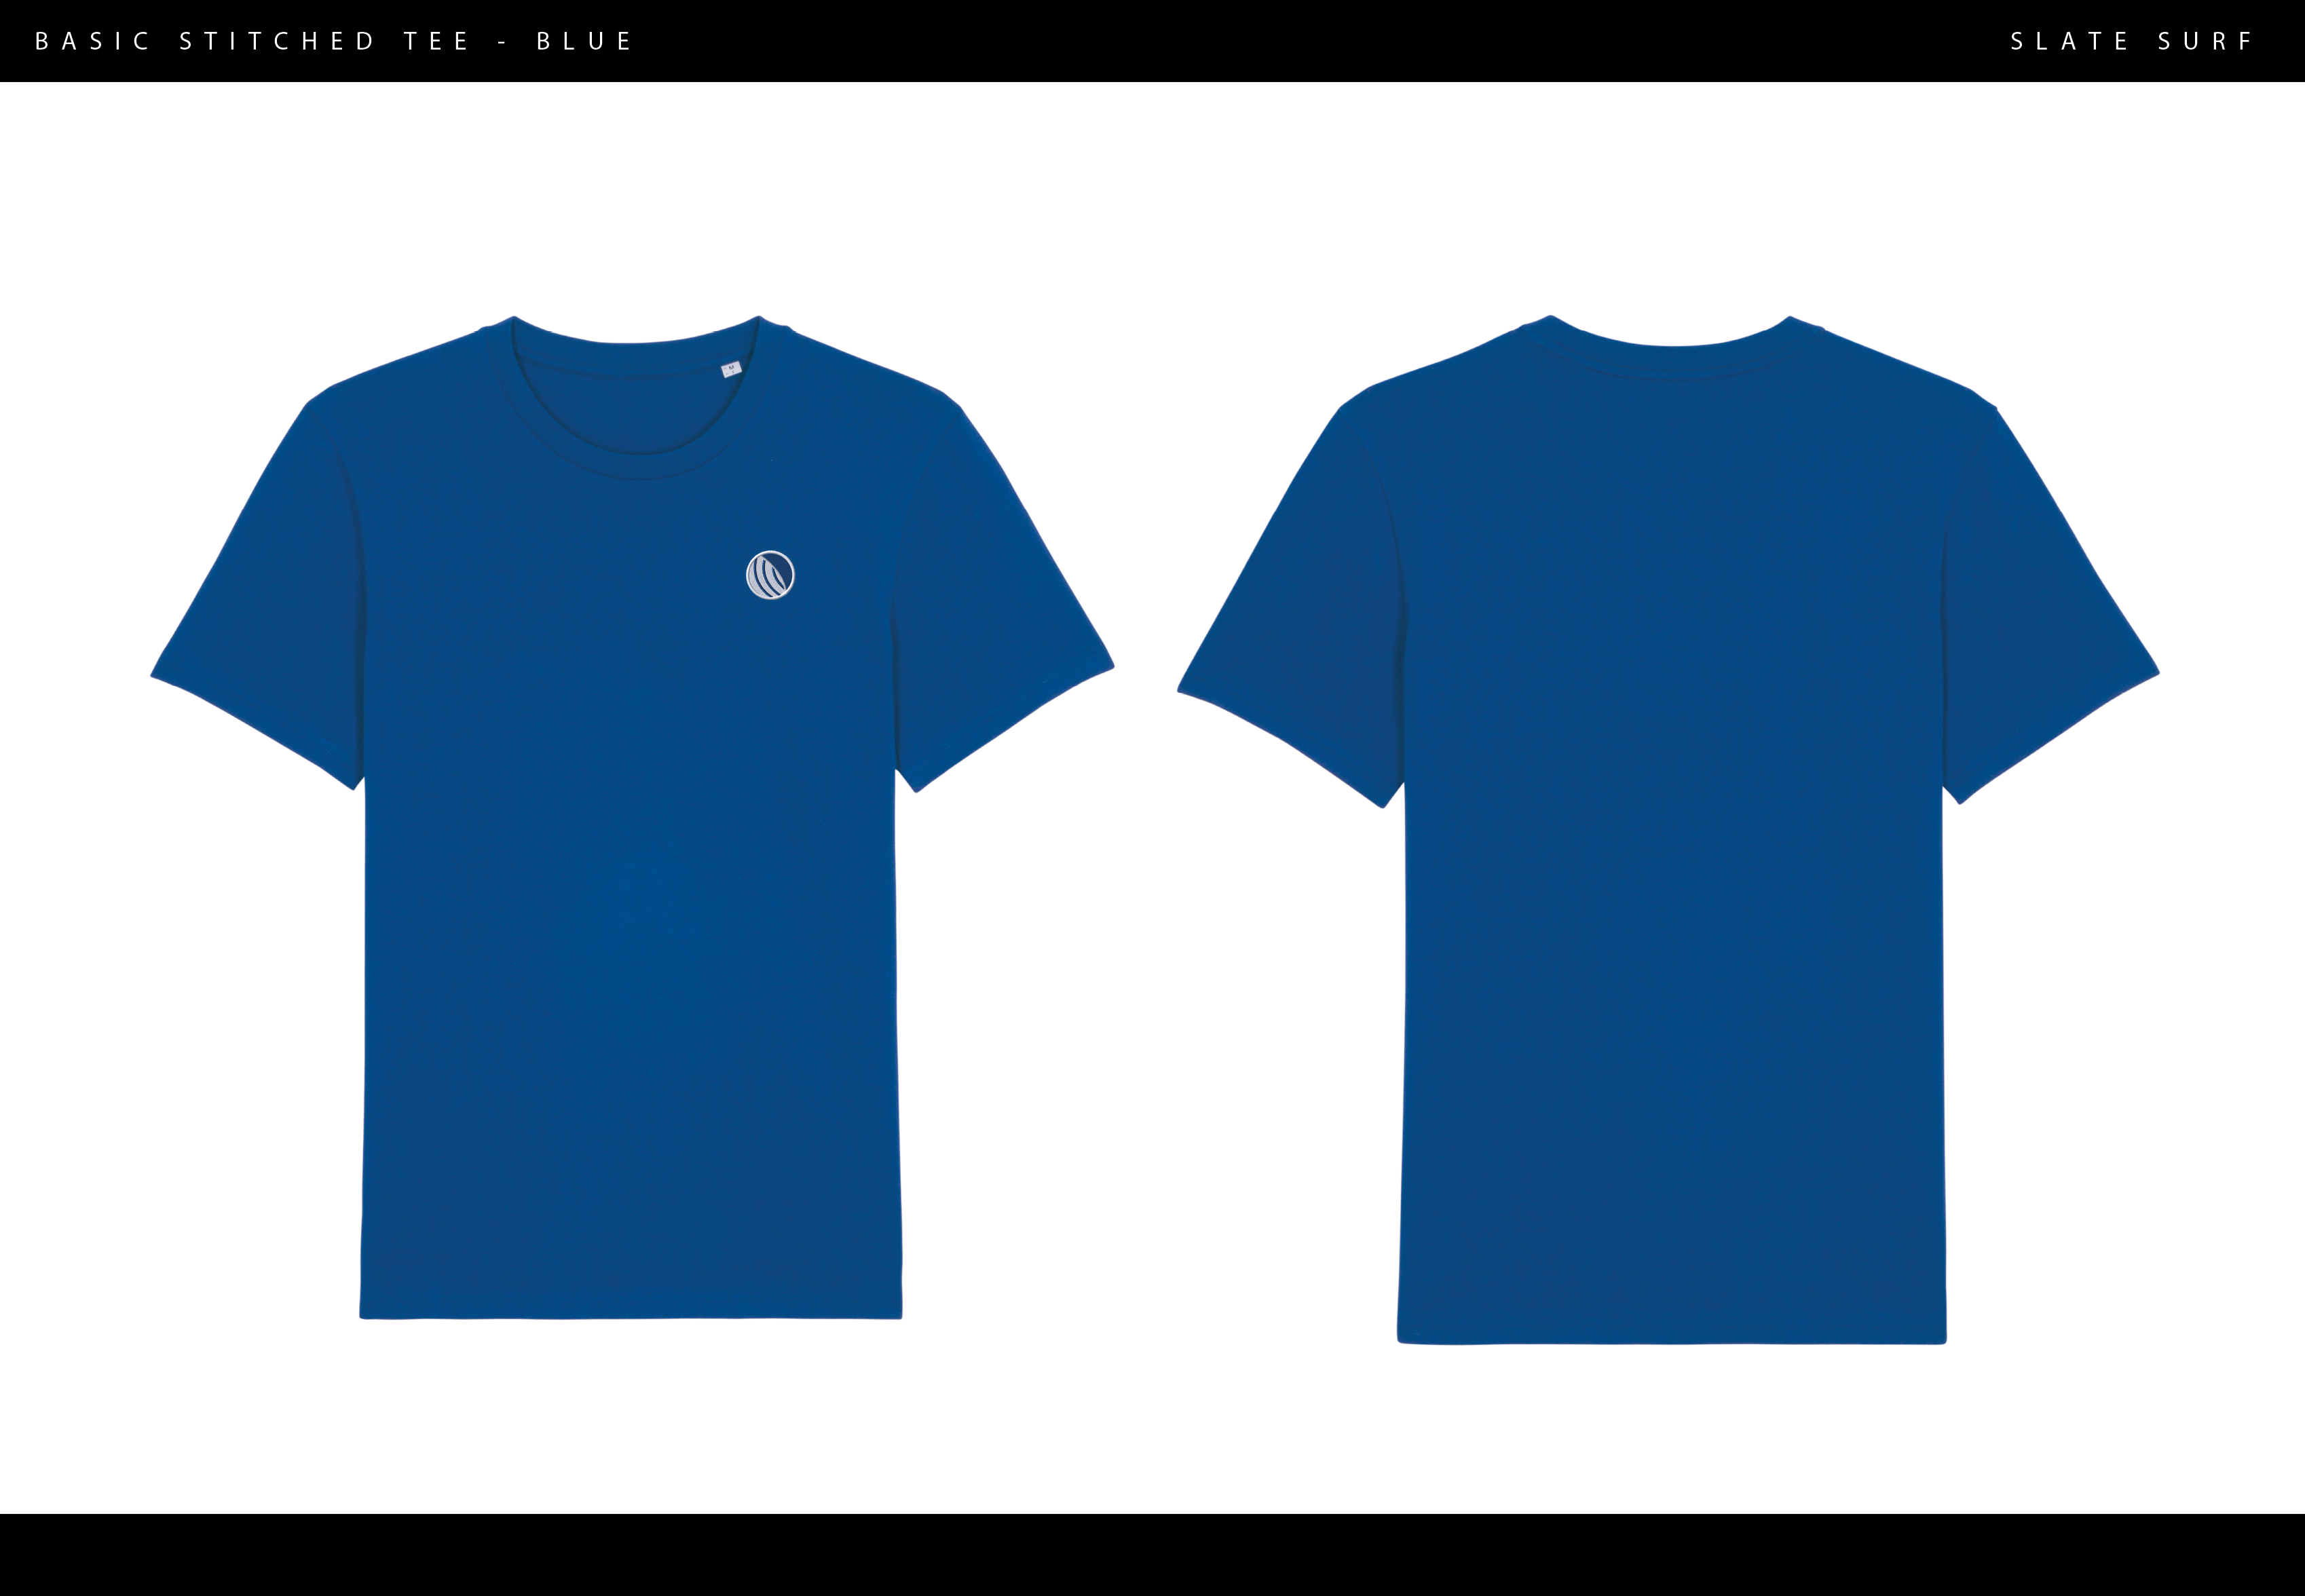 Slate Basic Stitched TEE collection-Blue